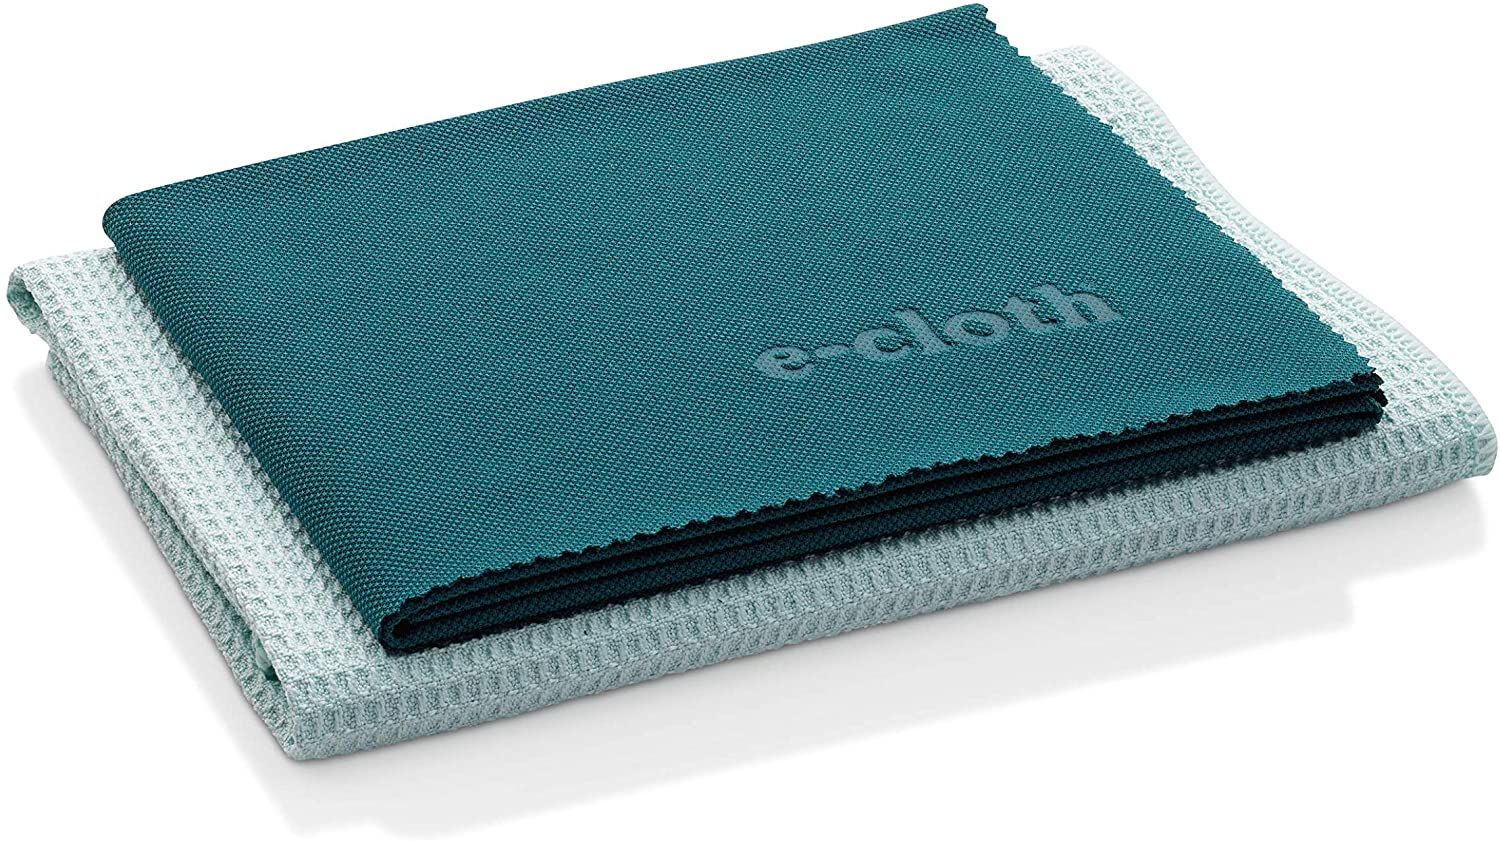 Window Cleaning Cloth, set of 2